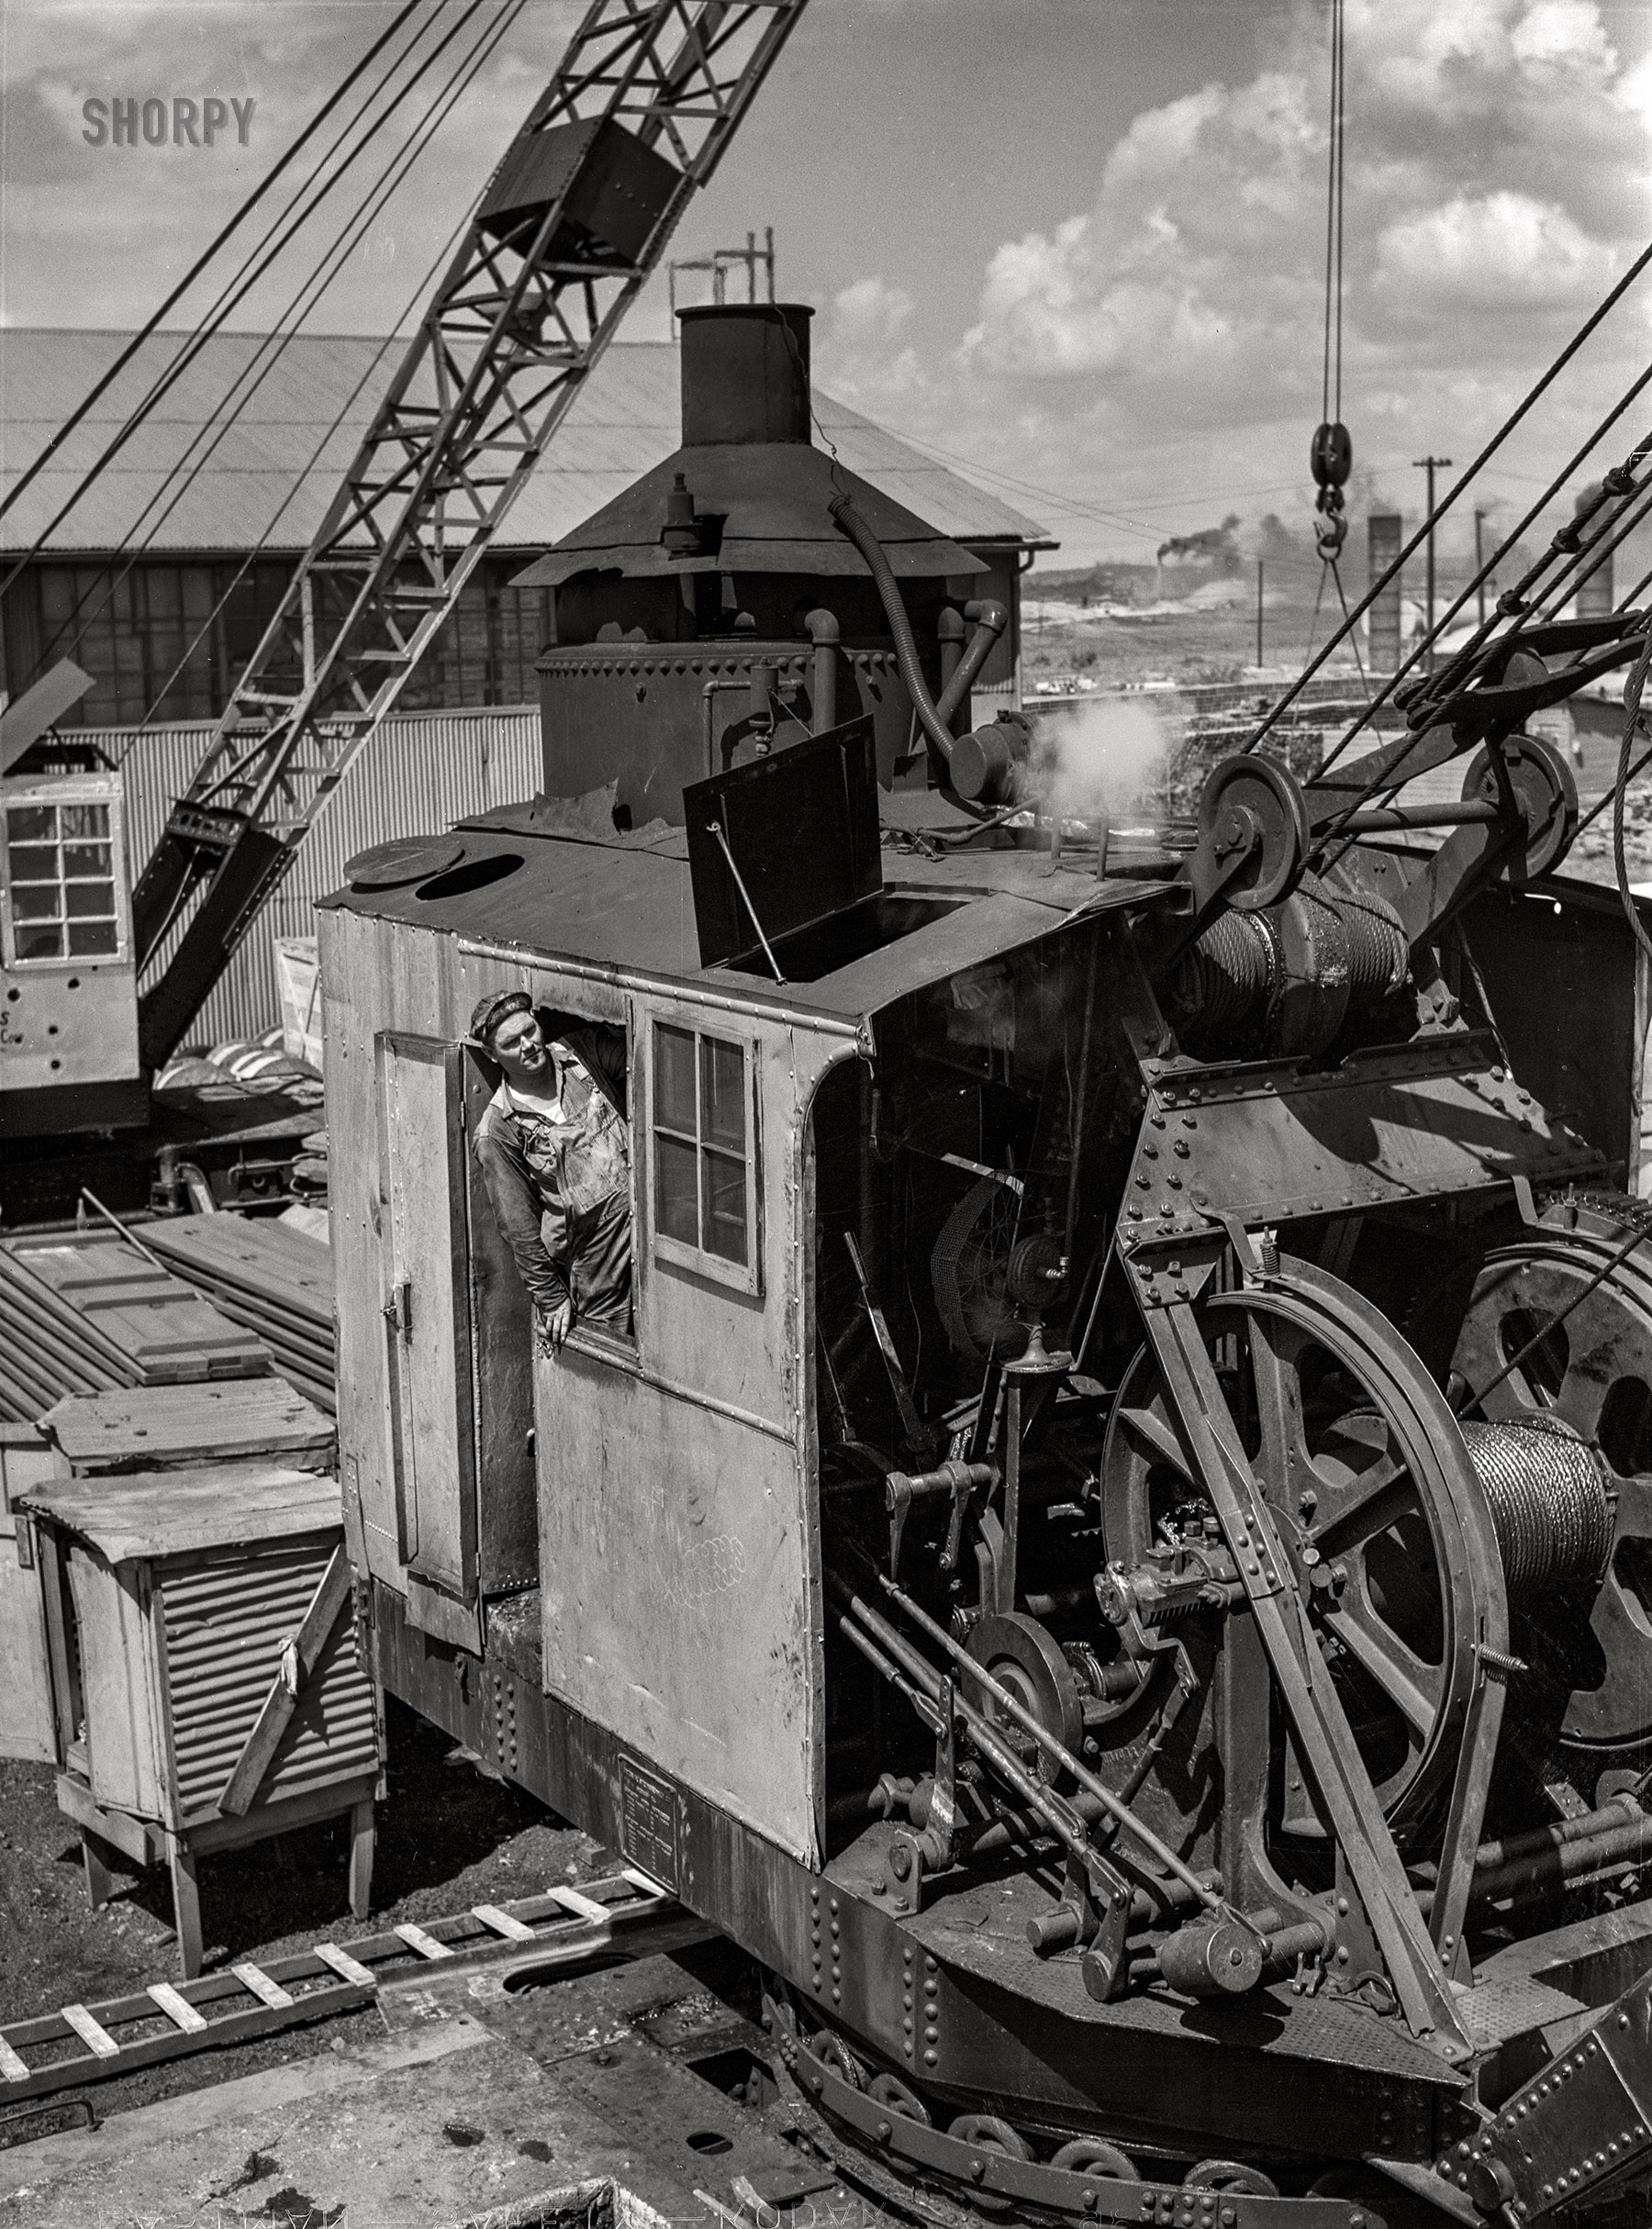 July 1942. "Decatur, Alabama. Ingalls Shipbuilding Company. A crane operator." Acetate negative by Jack Delano for the Office of War Information. View full size.